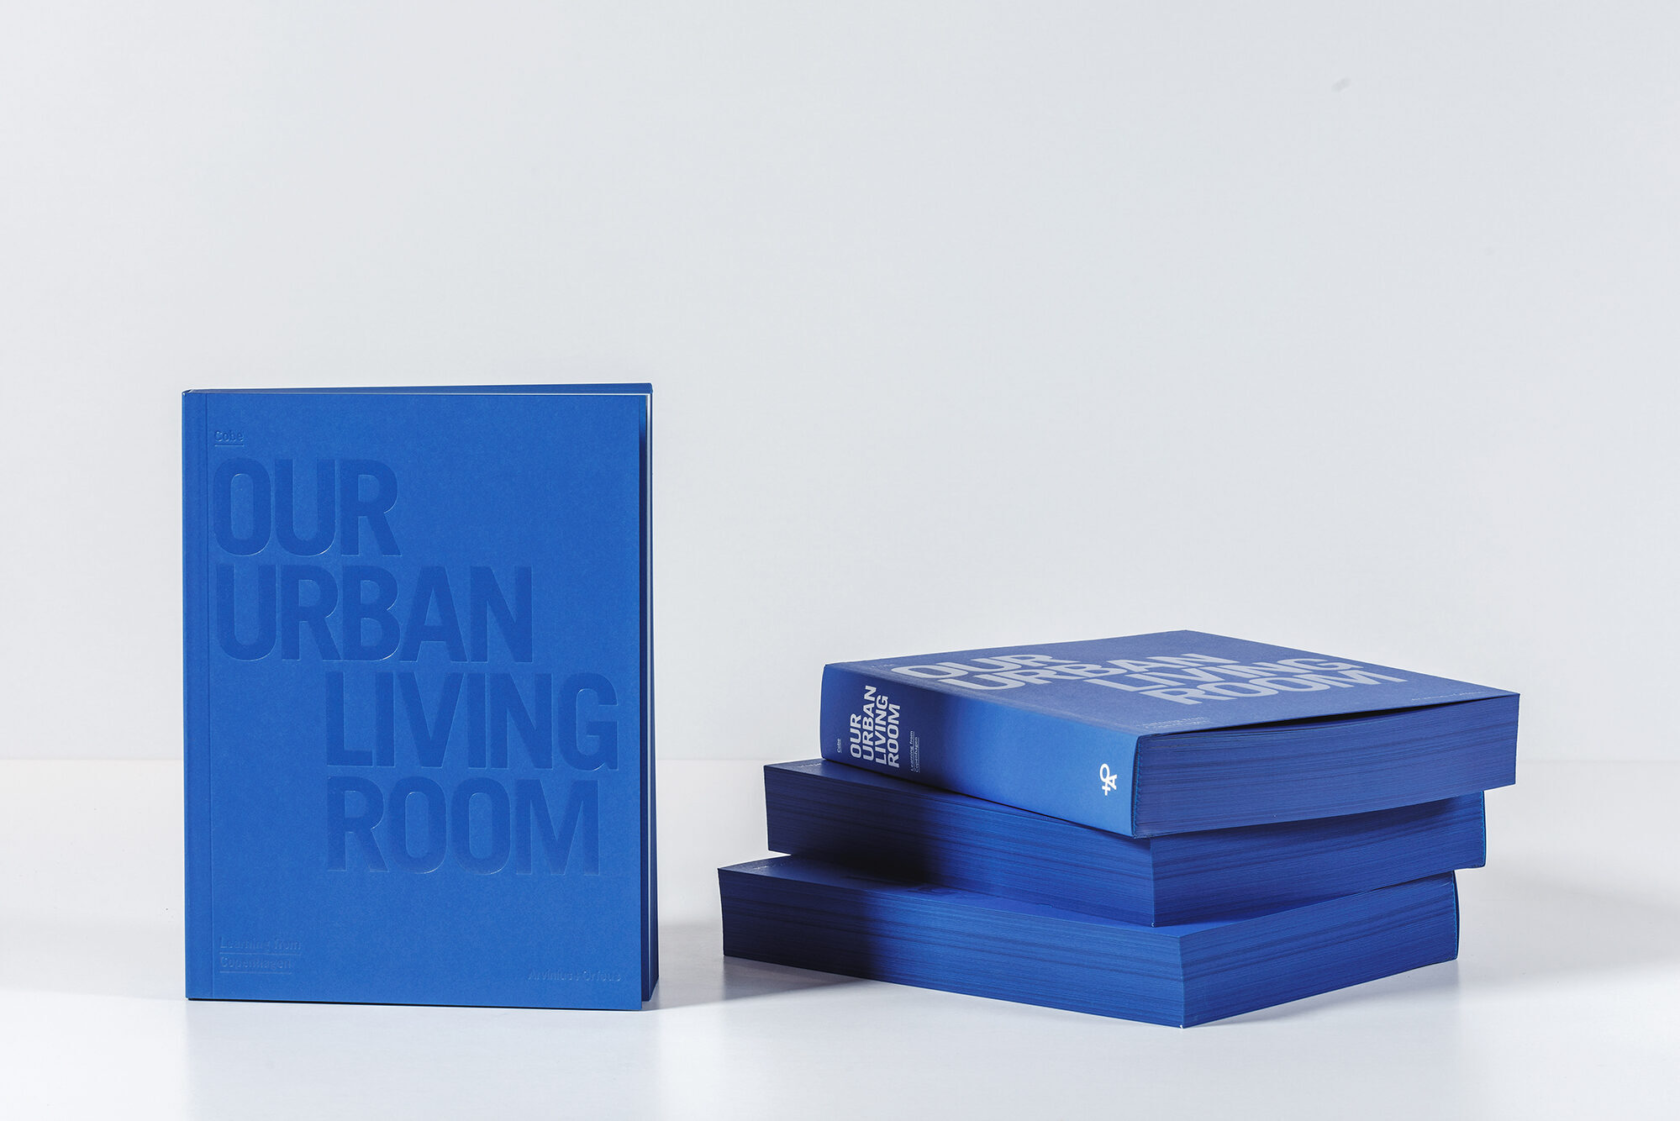 010 cobe objects our urban living room book d